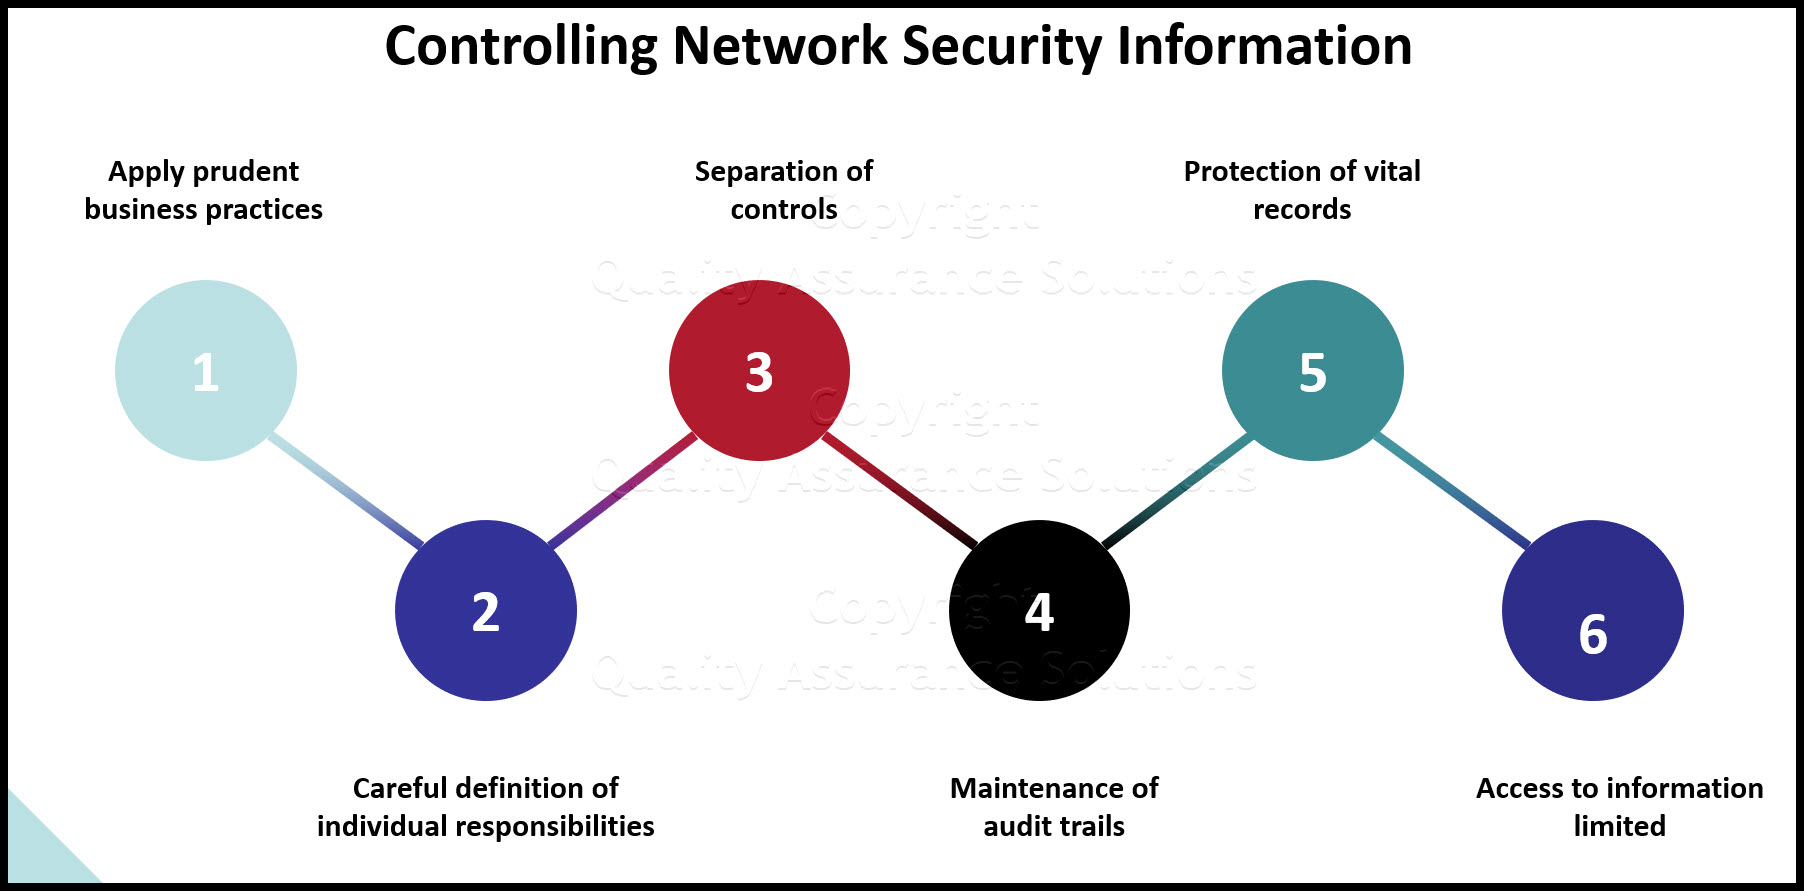 This article covers network security information which focuses on IT Policy, Information Security Awareness, and IT Compliance